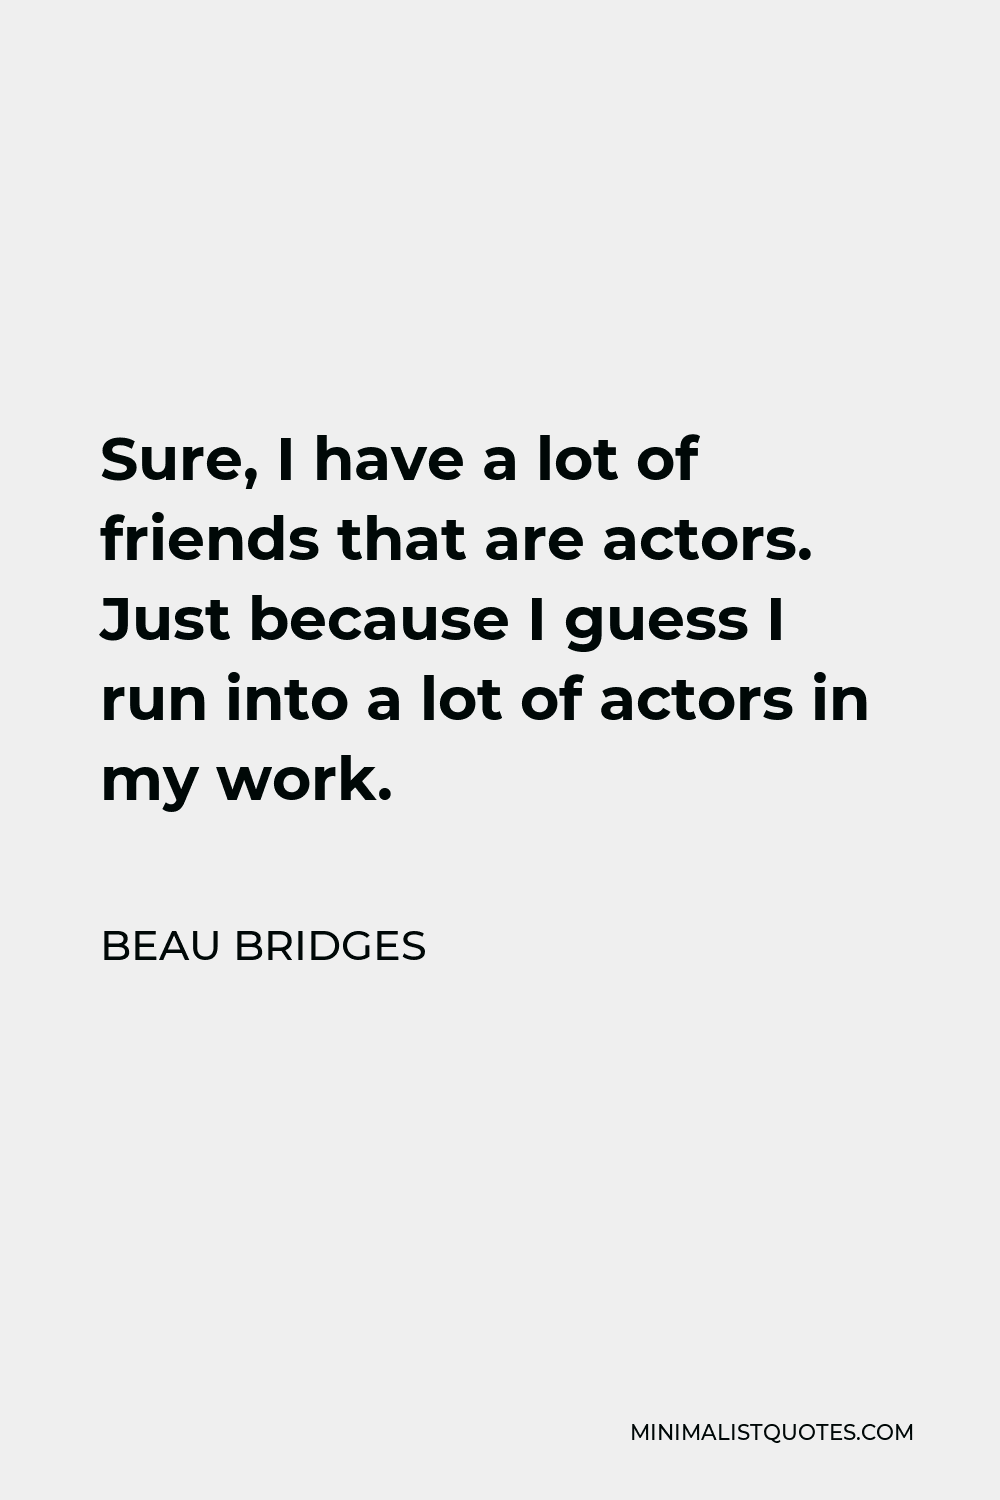 Beau Bridges Quote - Sure, I have a lot of friends that are actors. Just because I guess I run into a lot of actors in my work.